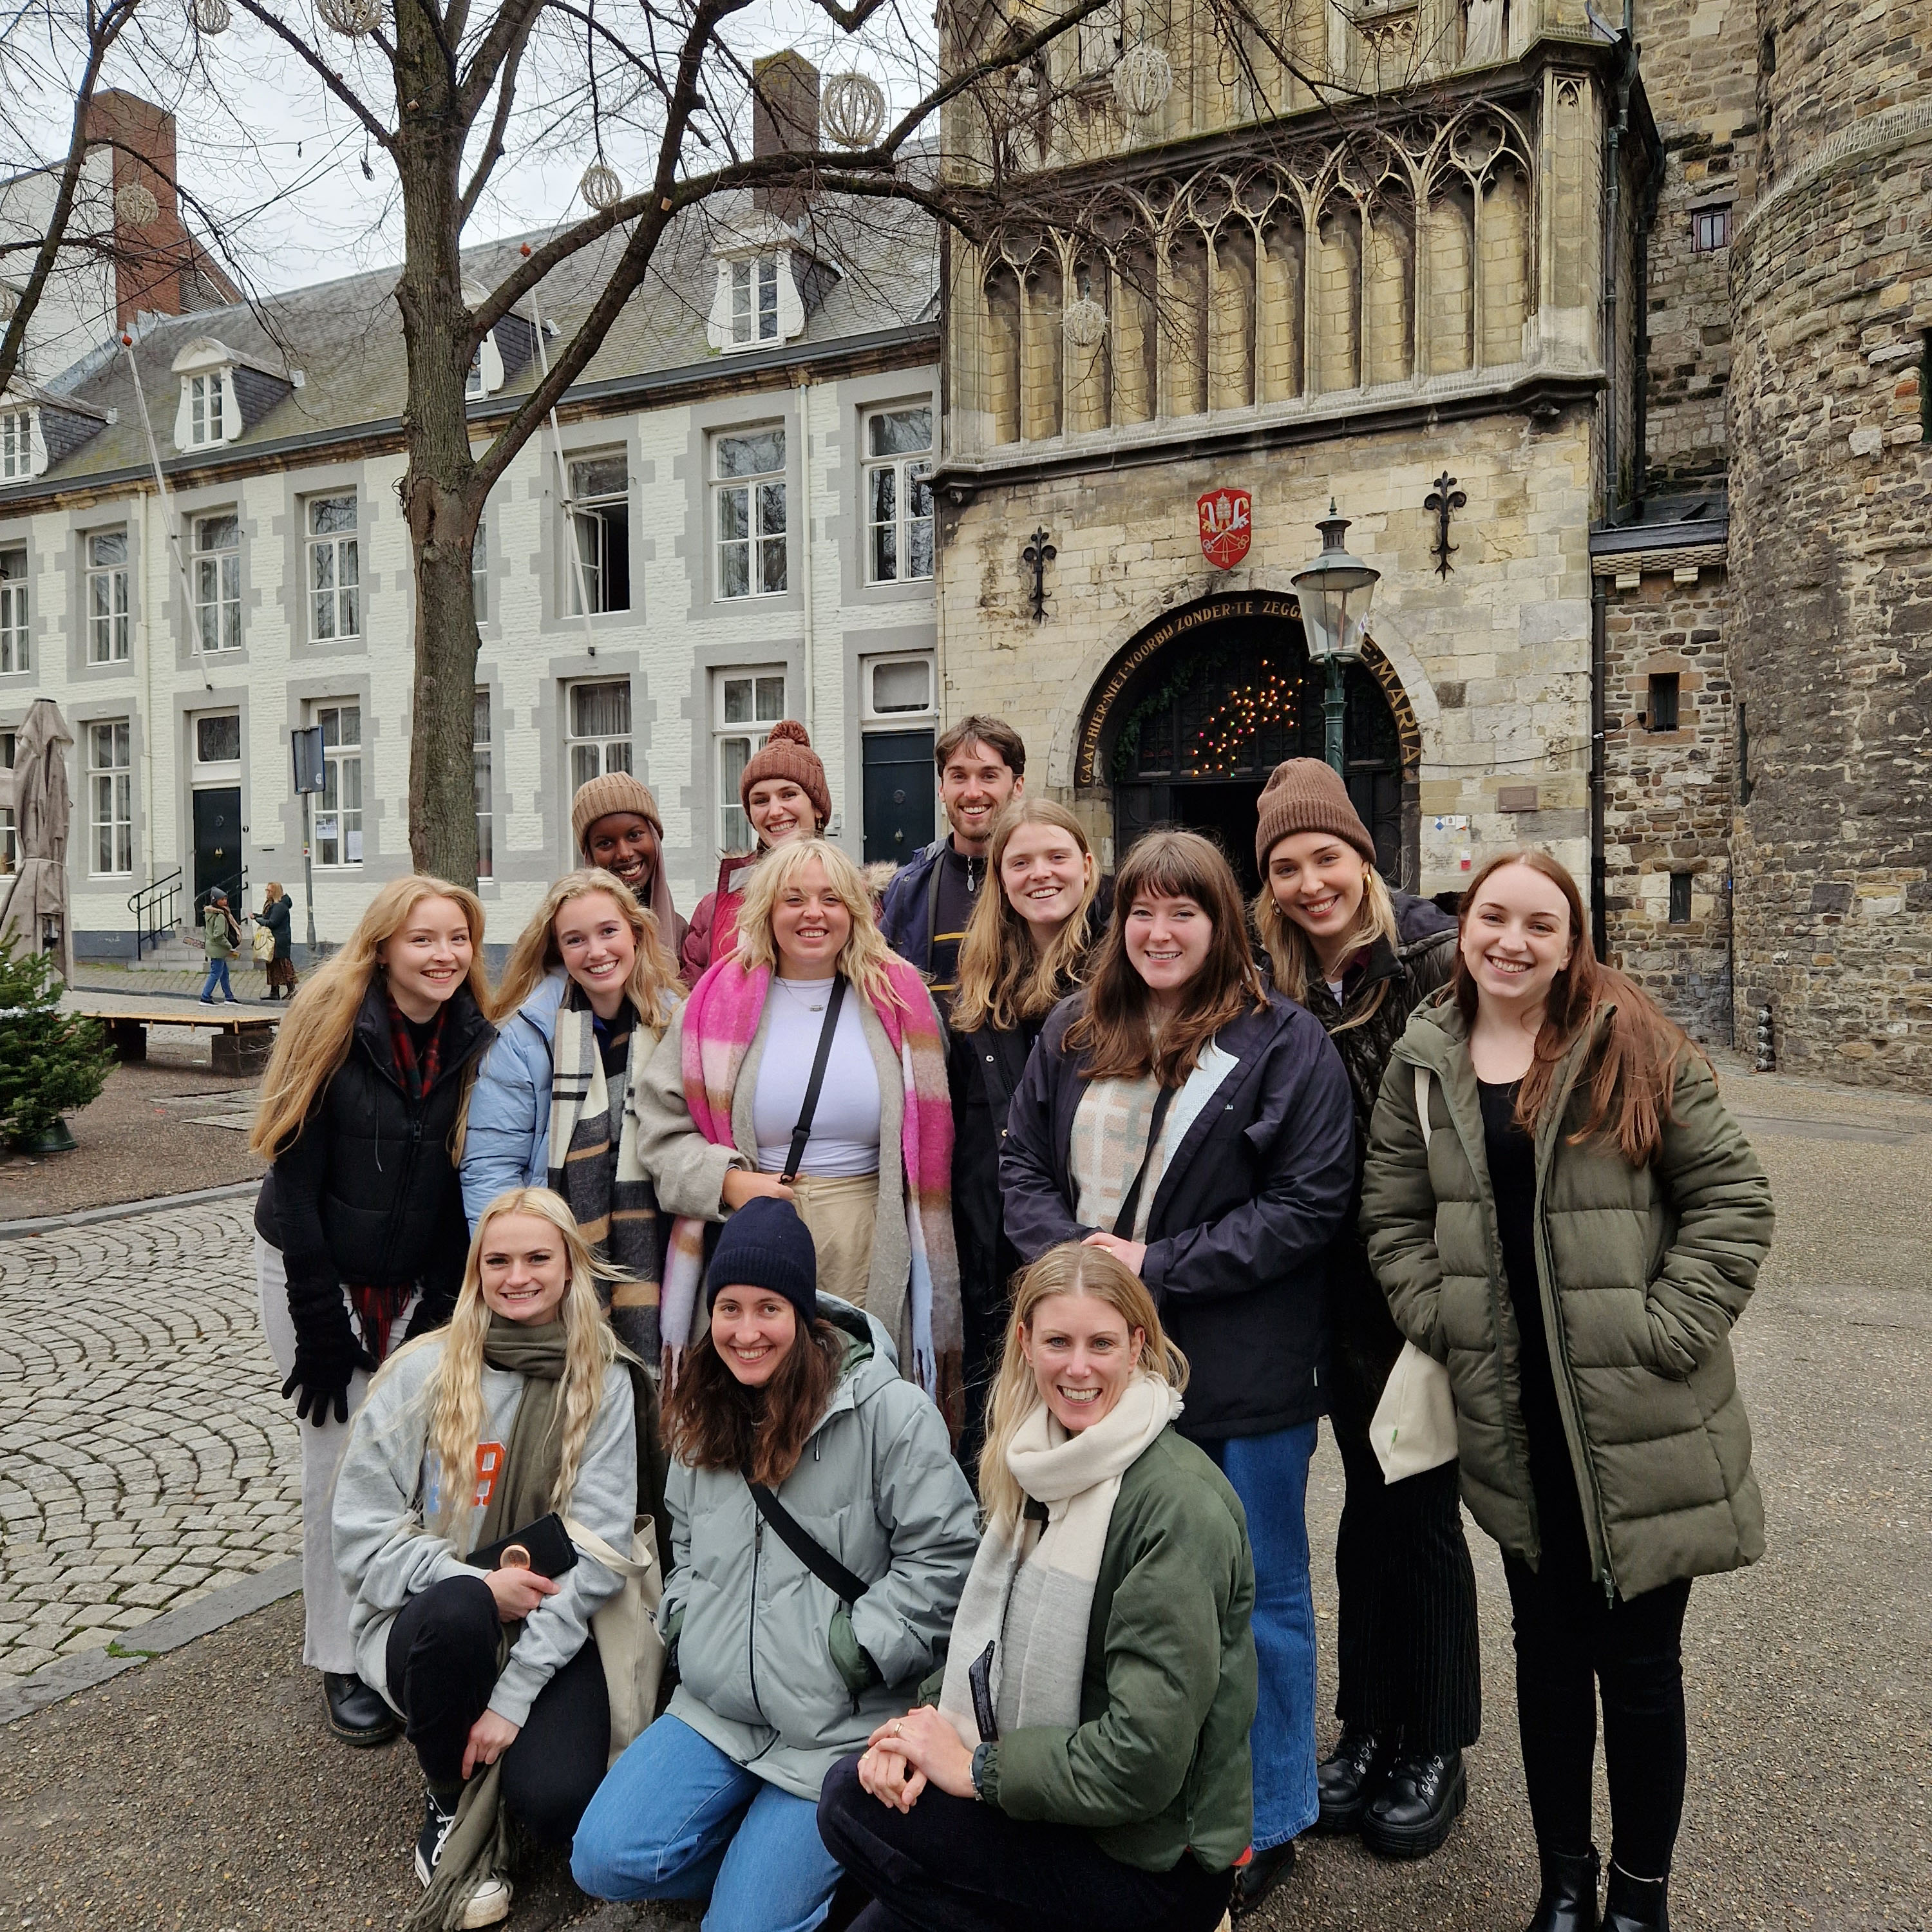 CES Positive Psychology students in Maastricht